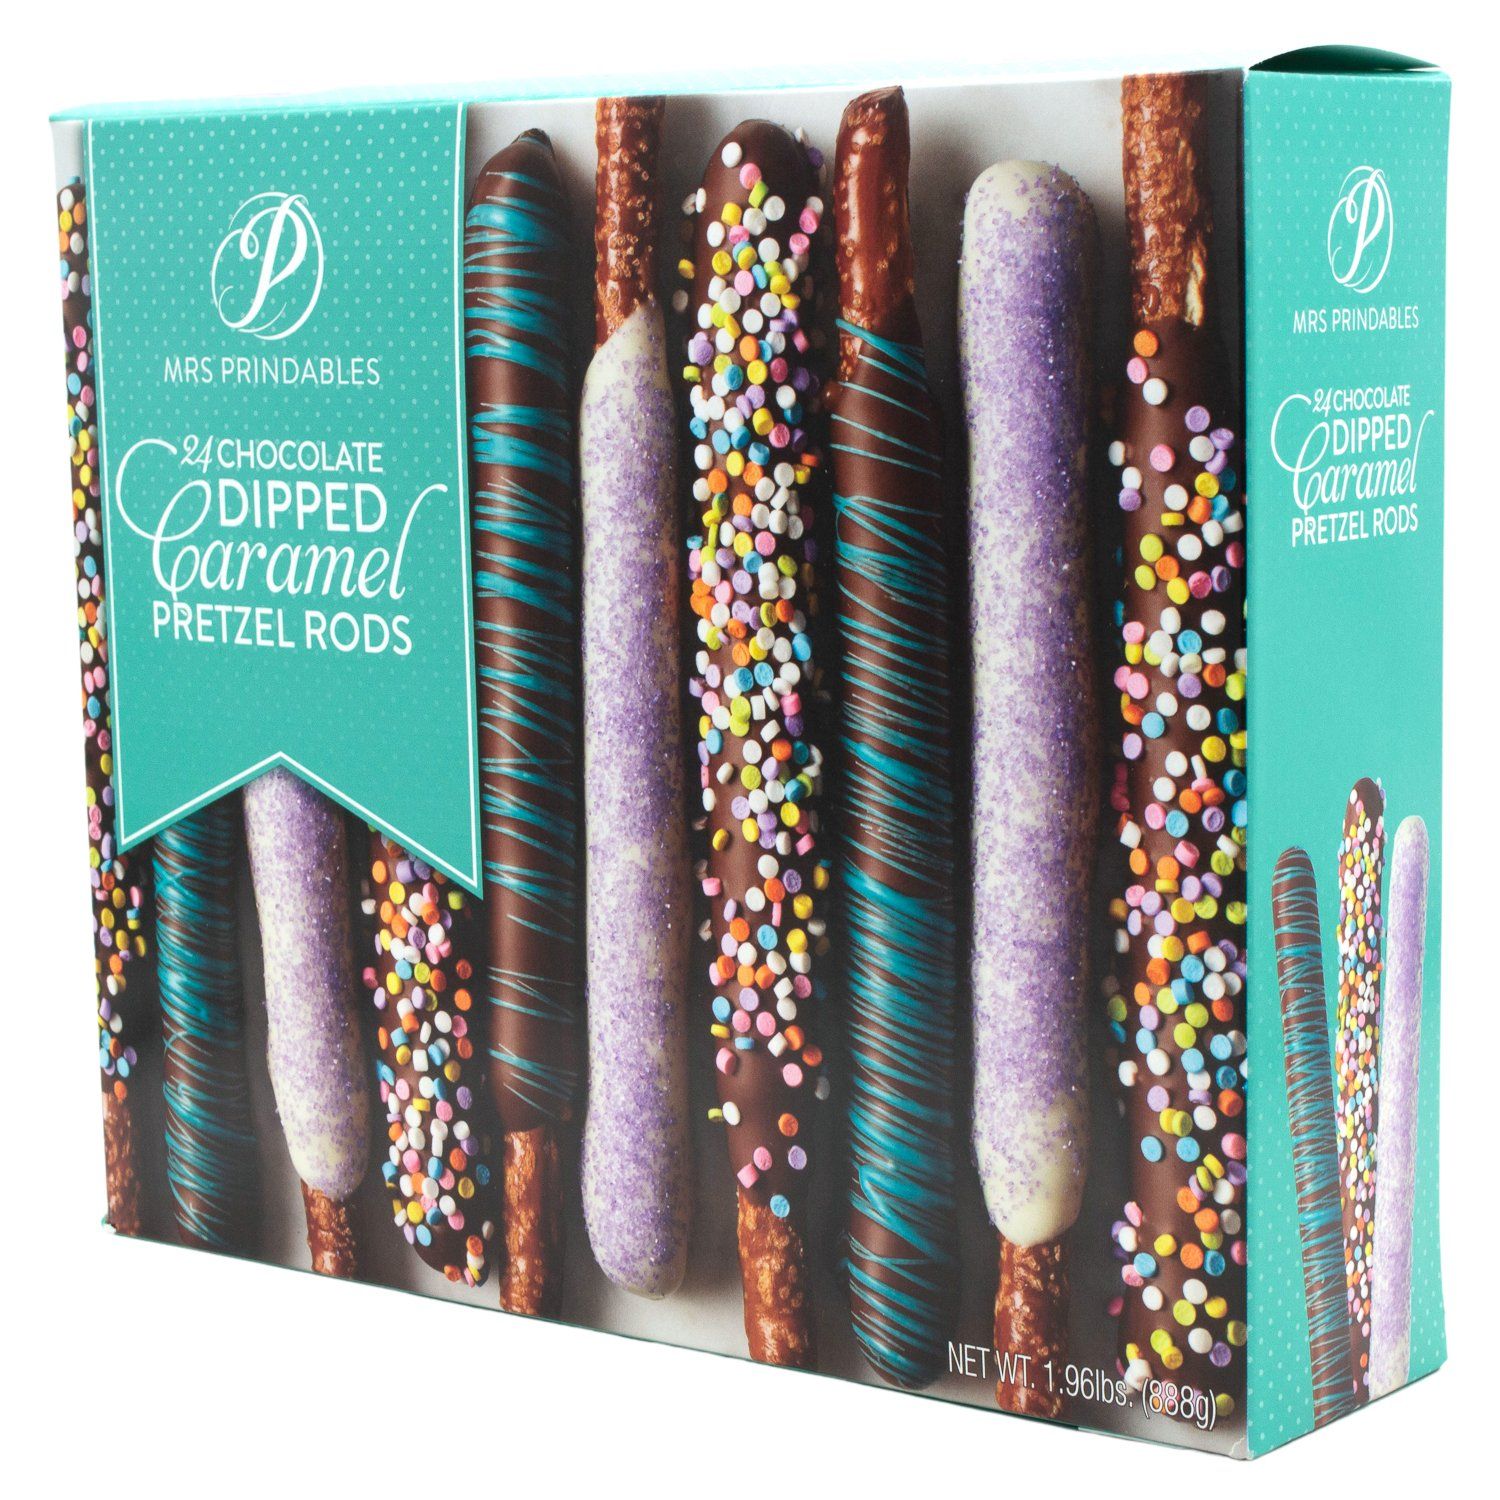 Mrs Prindables Chocolate Dipped Caramel Pretzels Rods Meltable Mrs Prindables Variety 24 Rods-1.96 Pound (3 Flavors) 